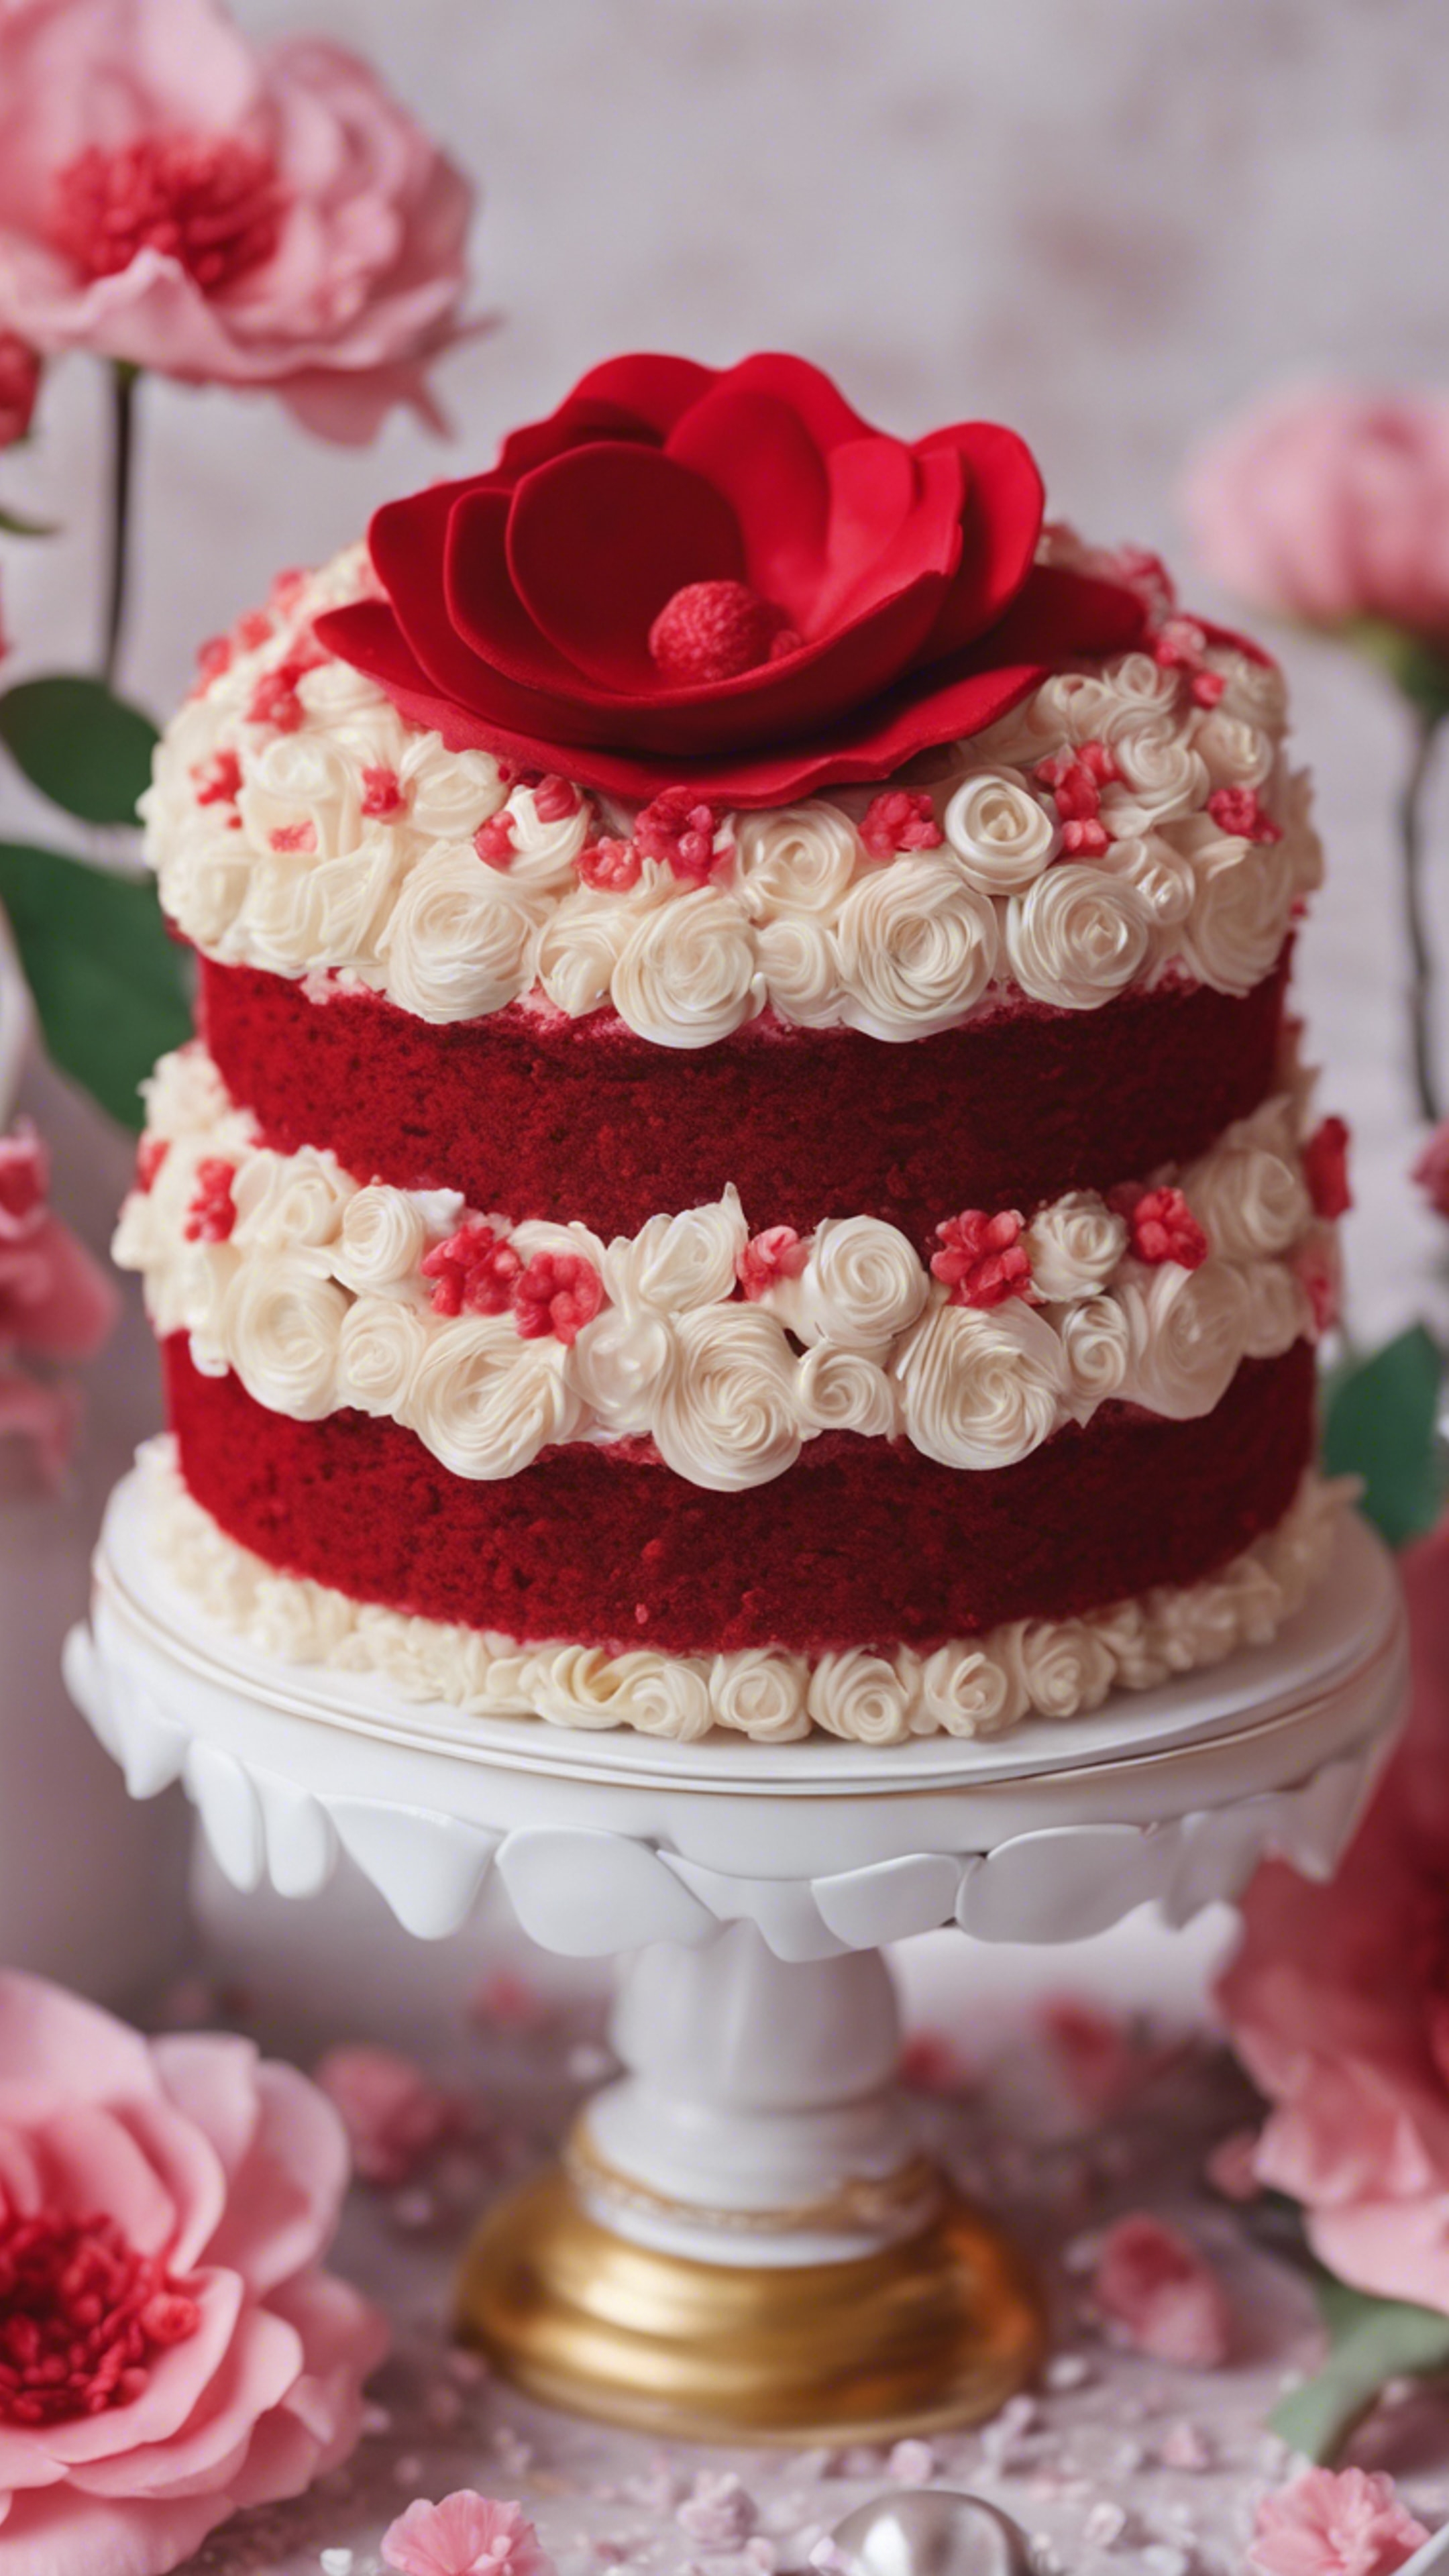 A kawaii red velvet cake decorated with intricate icing flowers. Wallpaper[322bdbd4c9bb4e1a9dd6]